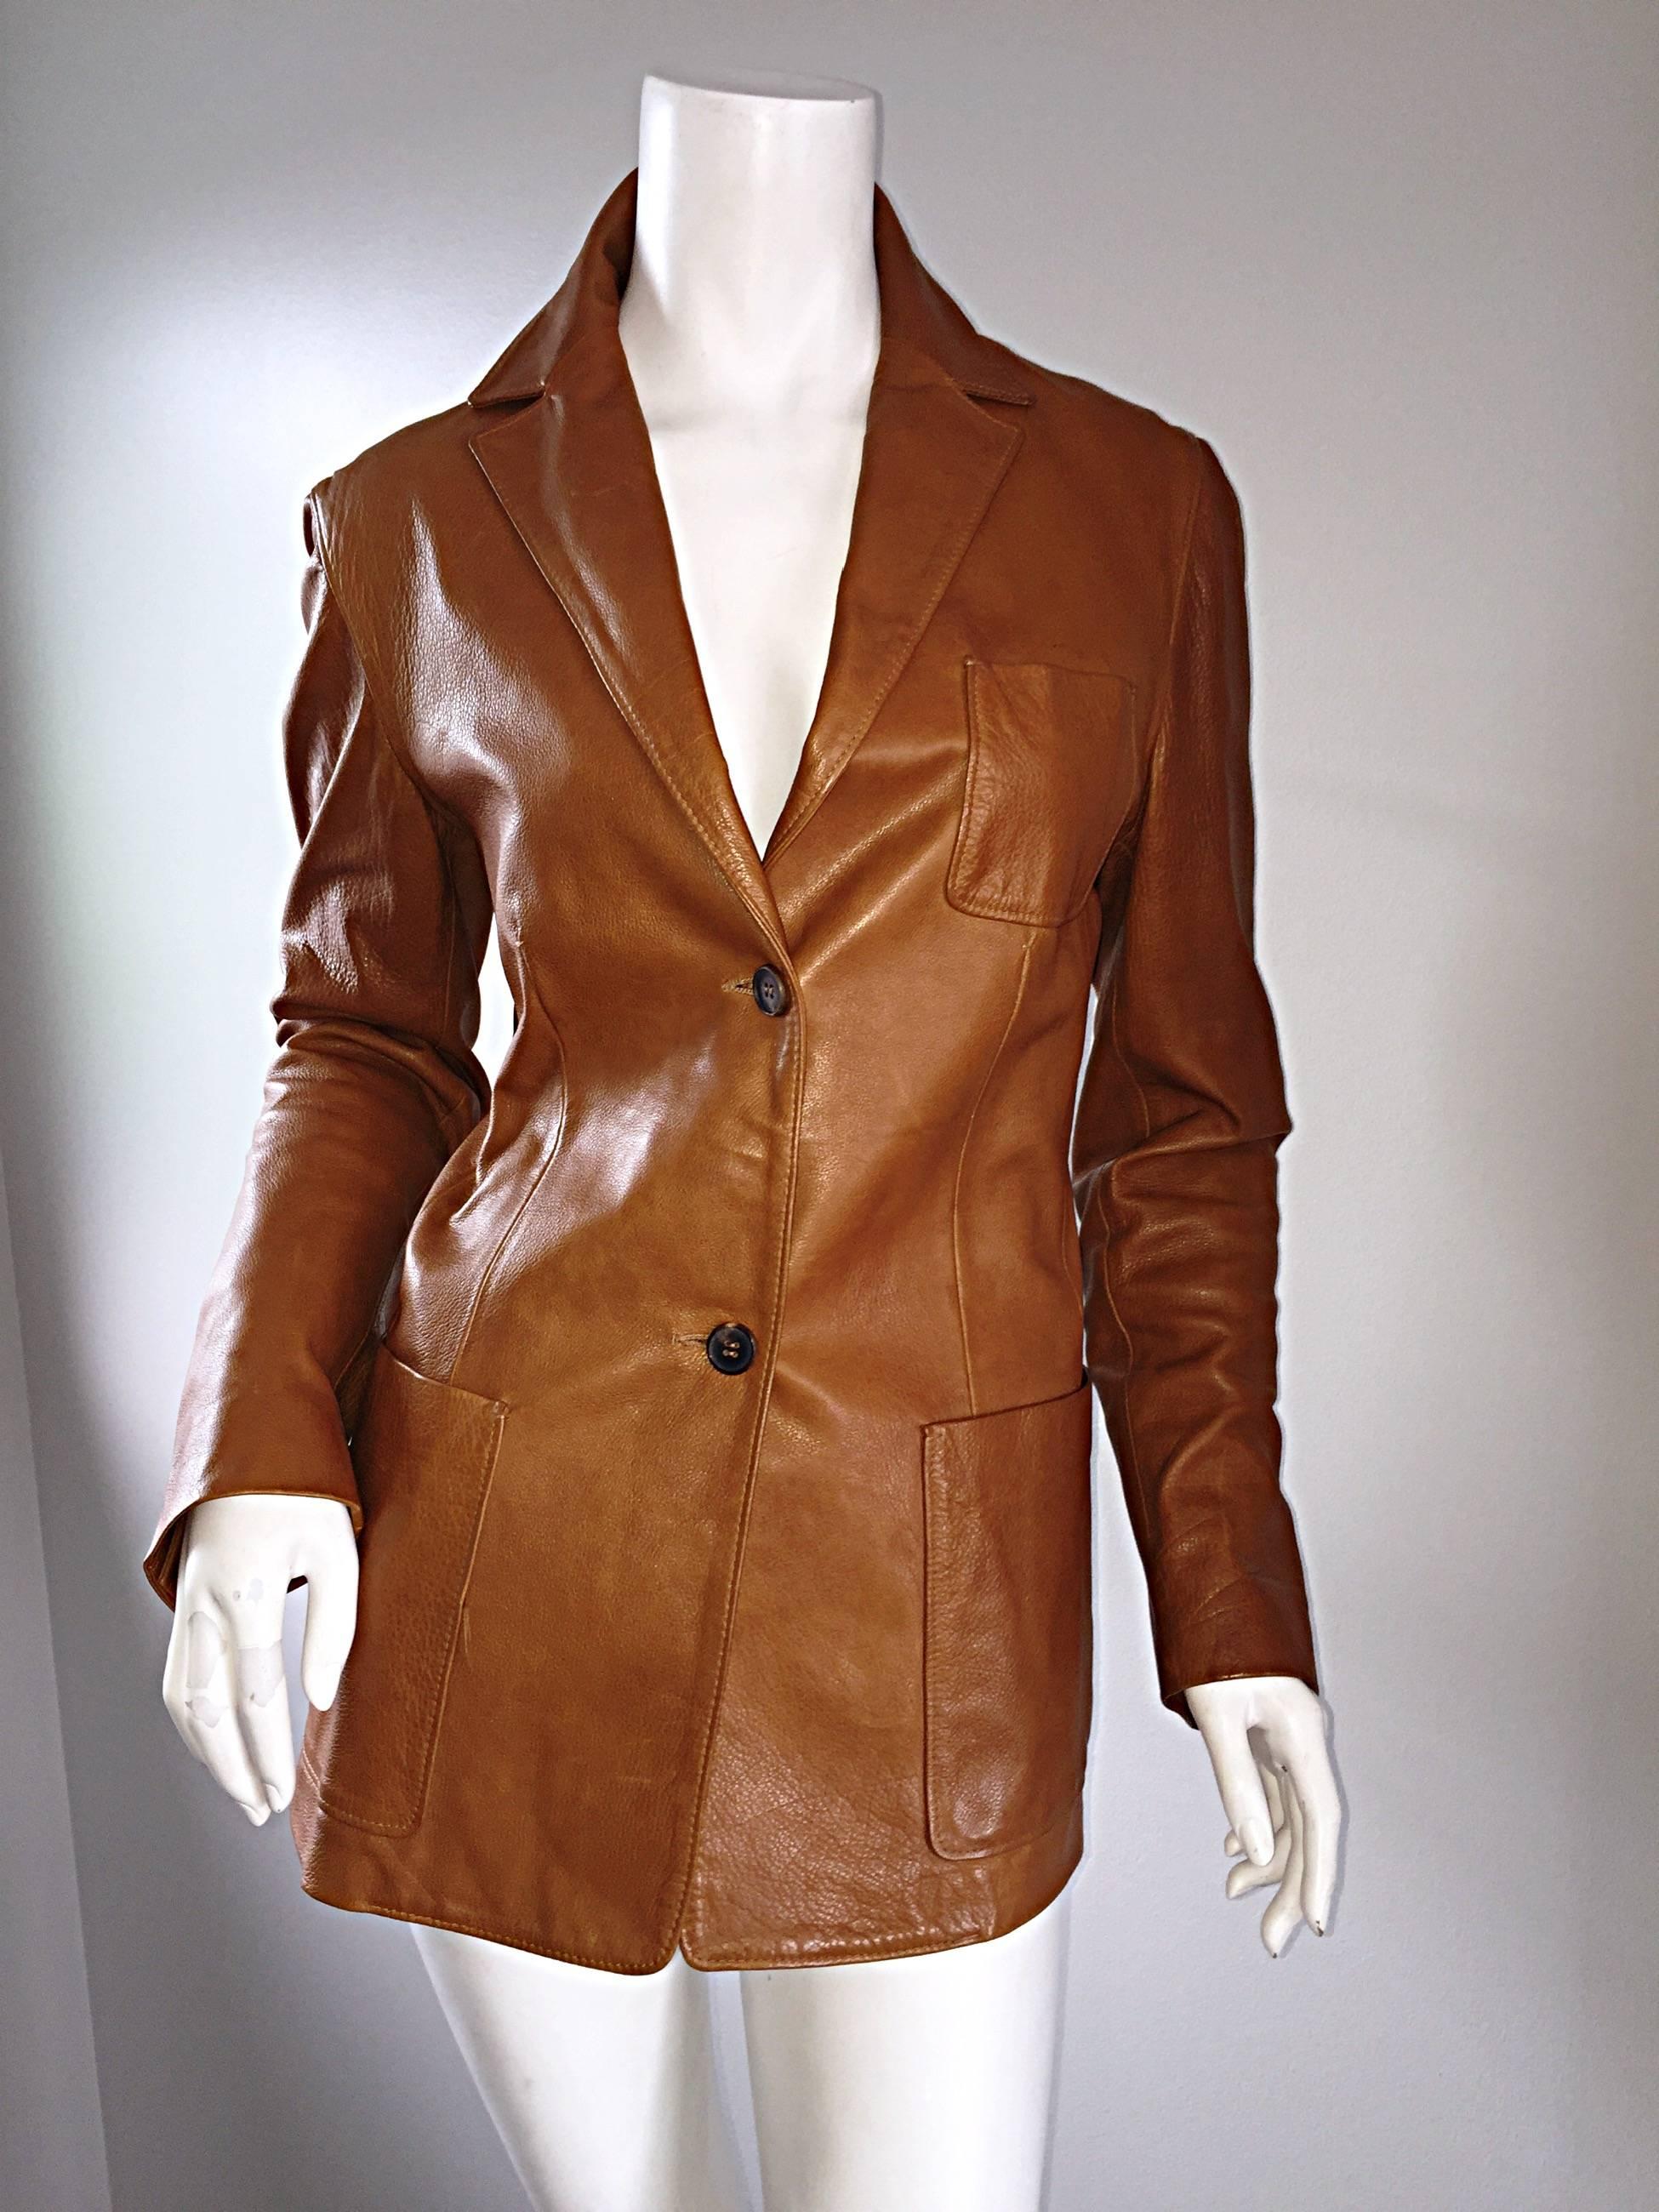 Jil Sander Perfect Vintage 1990s Tan Saddle Leather Jacket Blazer Minimalist  In Excellent Condition In San Diego, CA